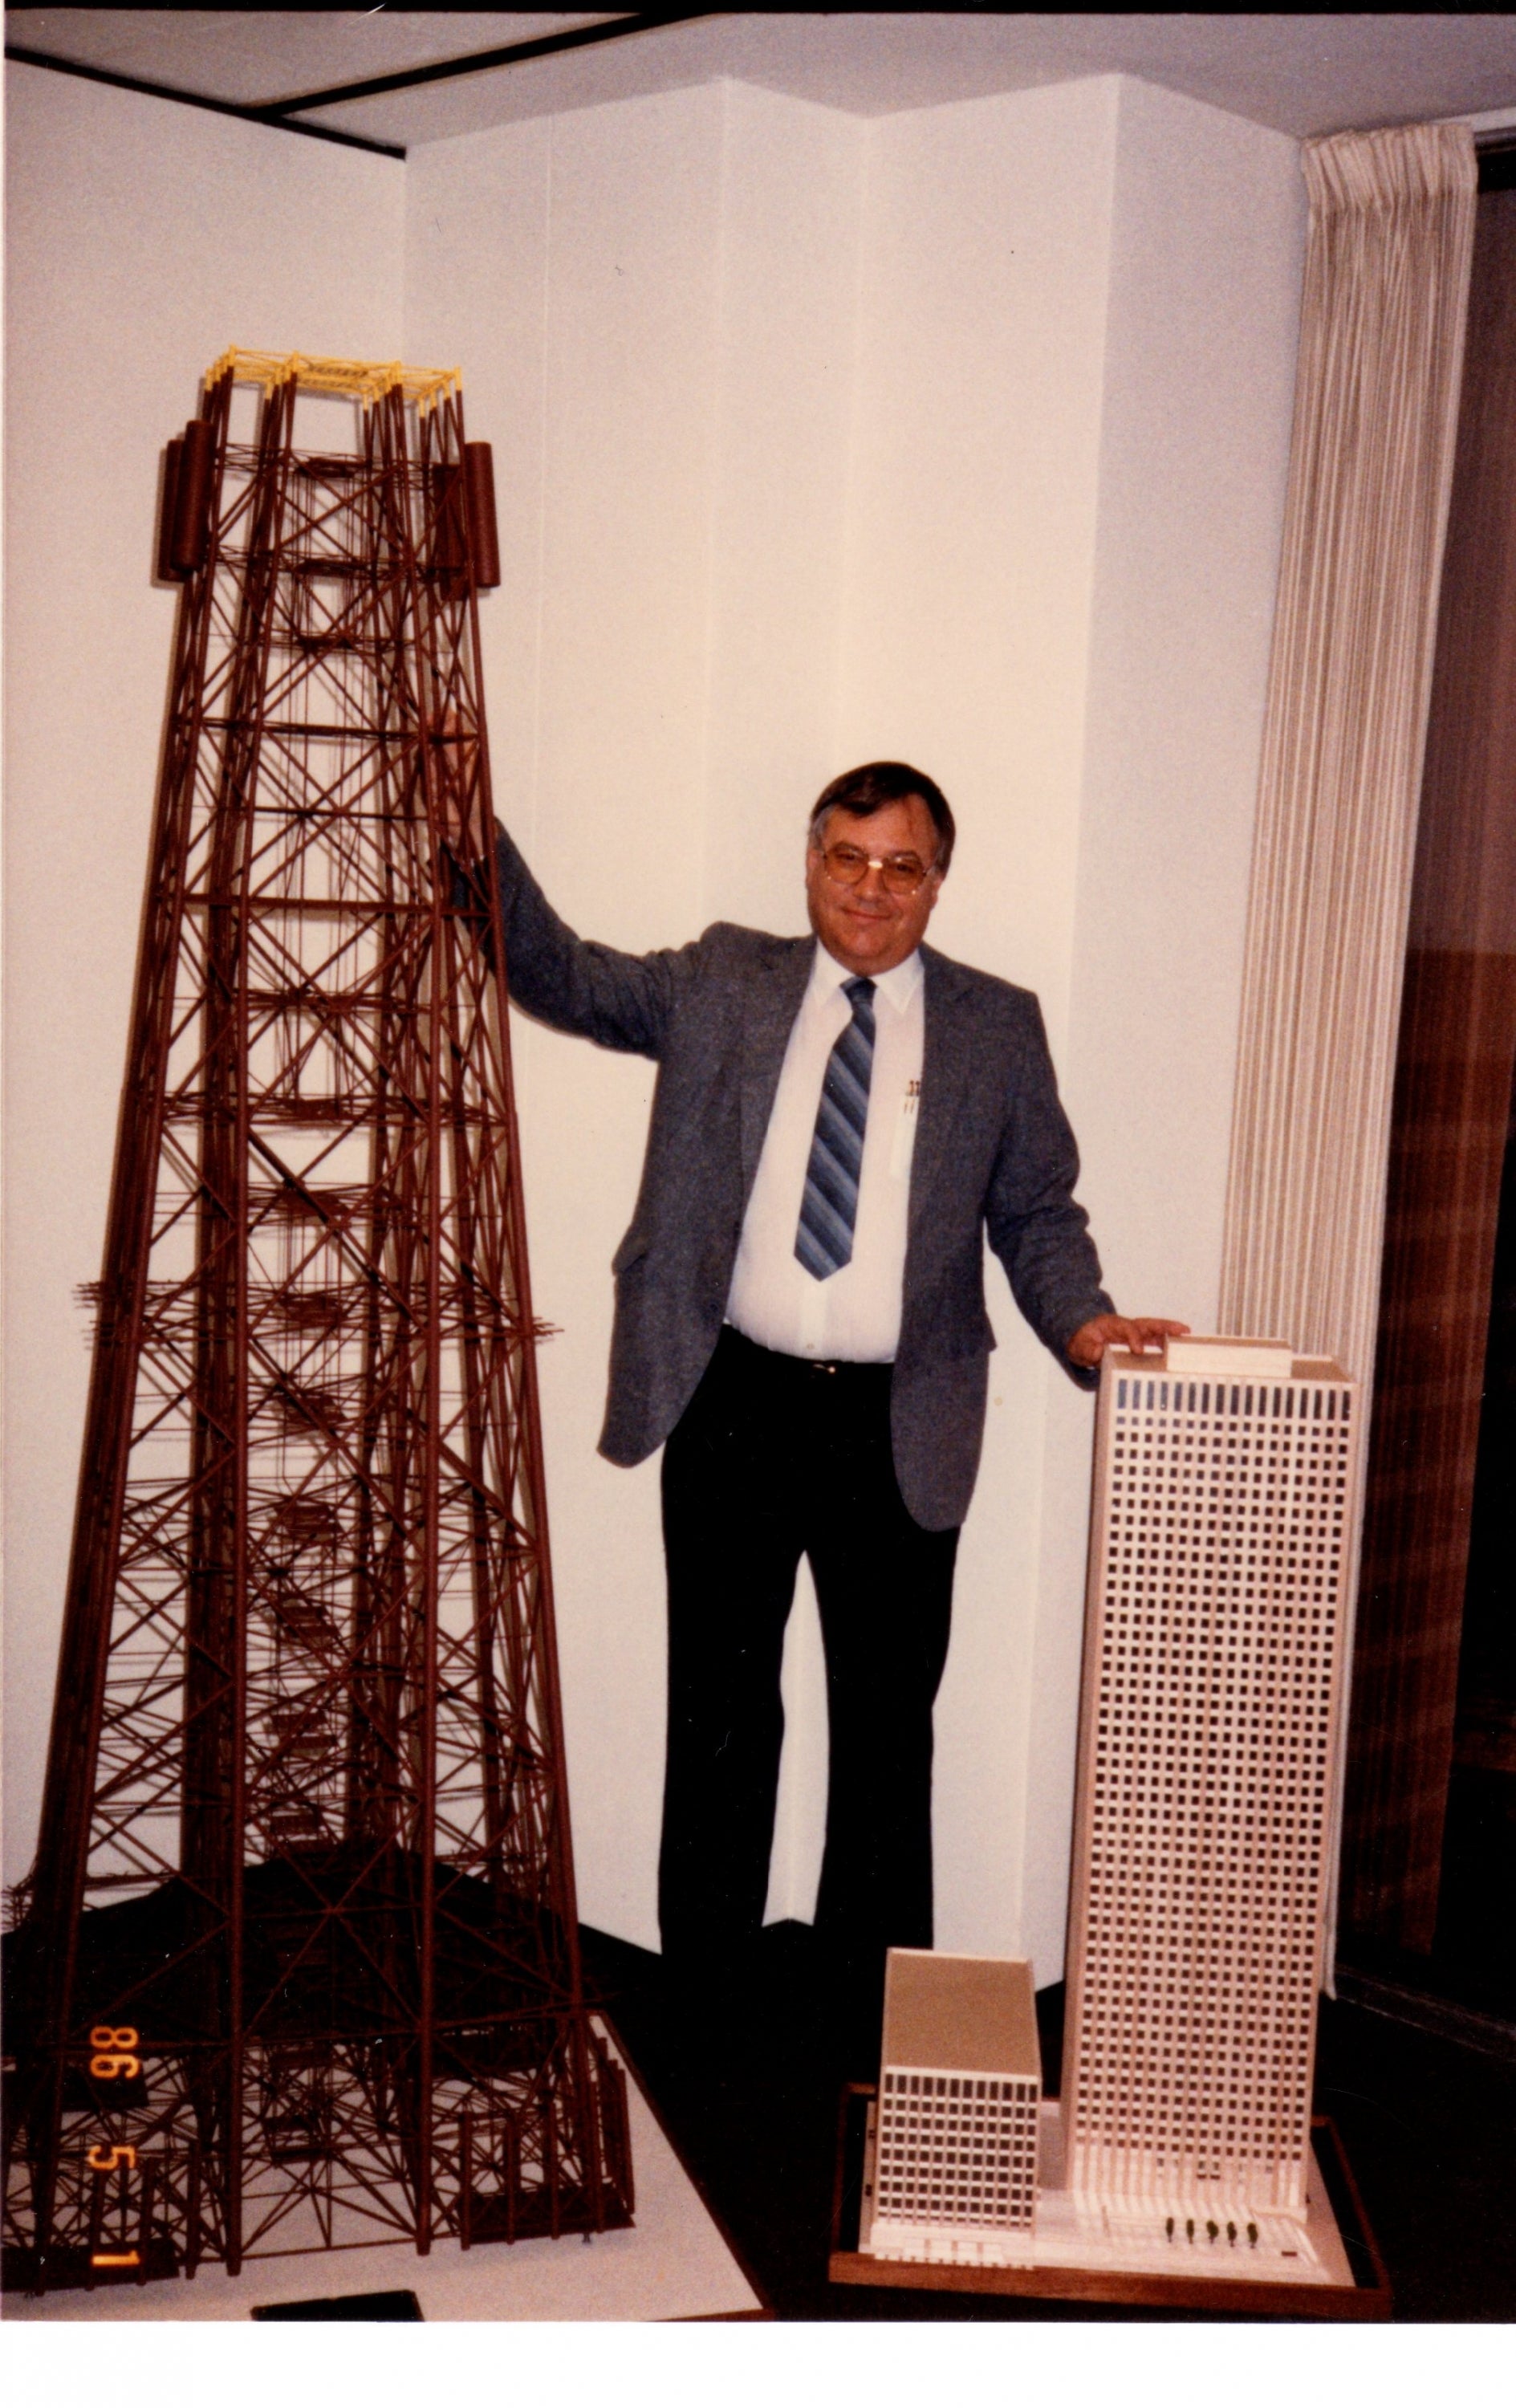 Gordon with building models